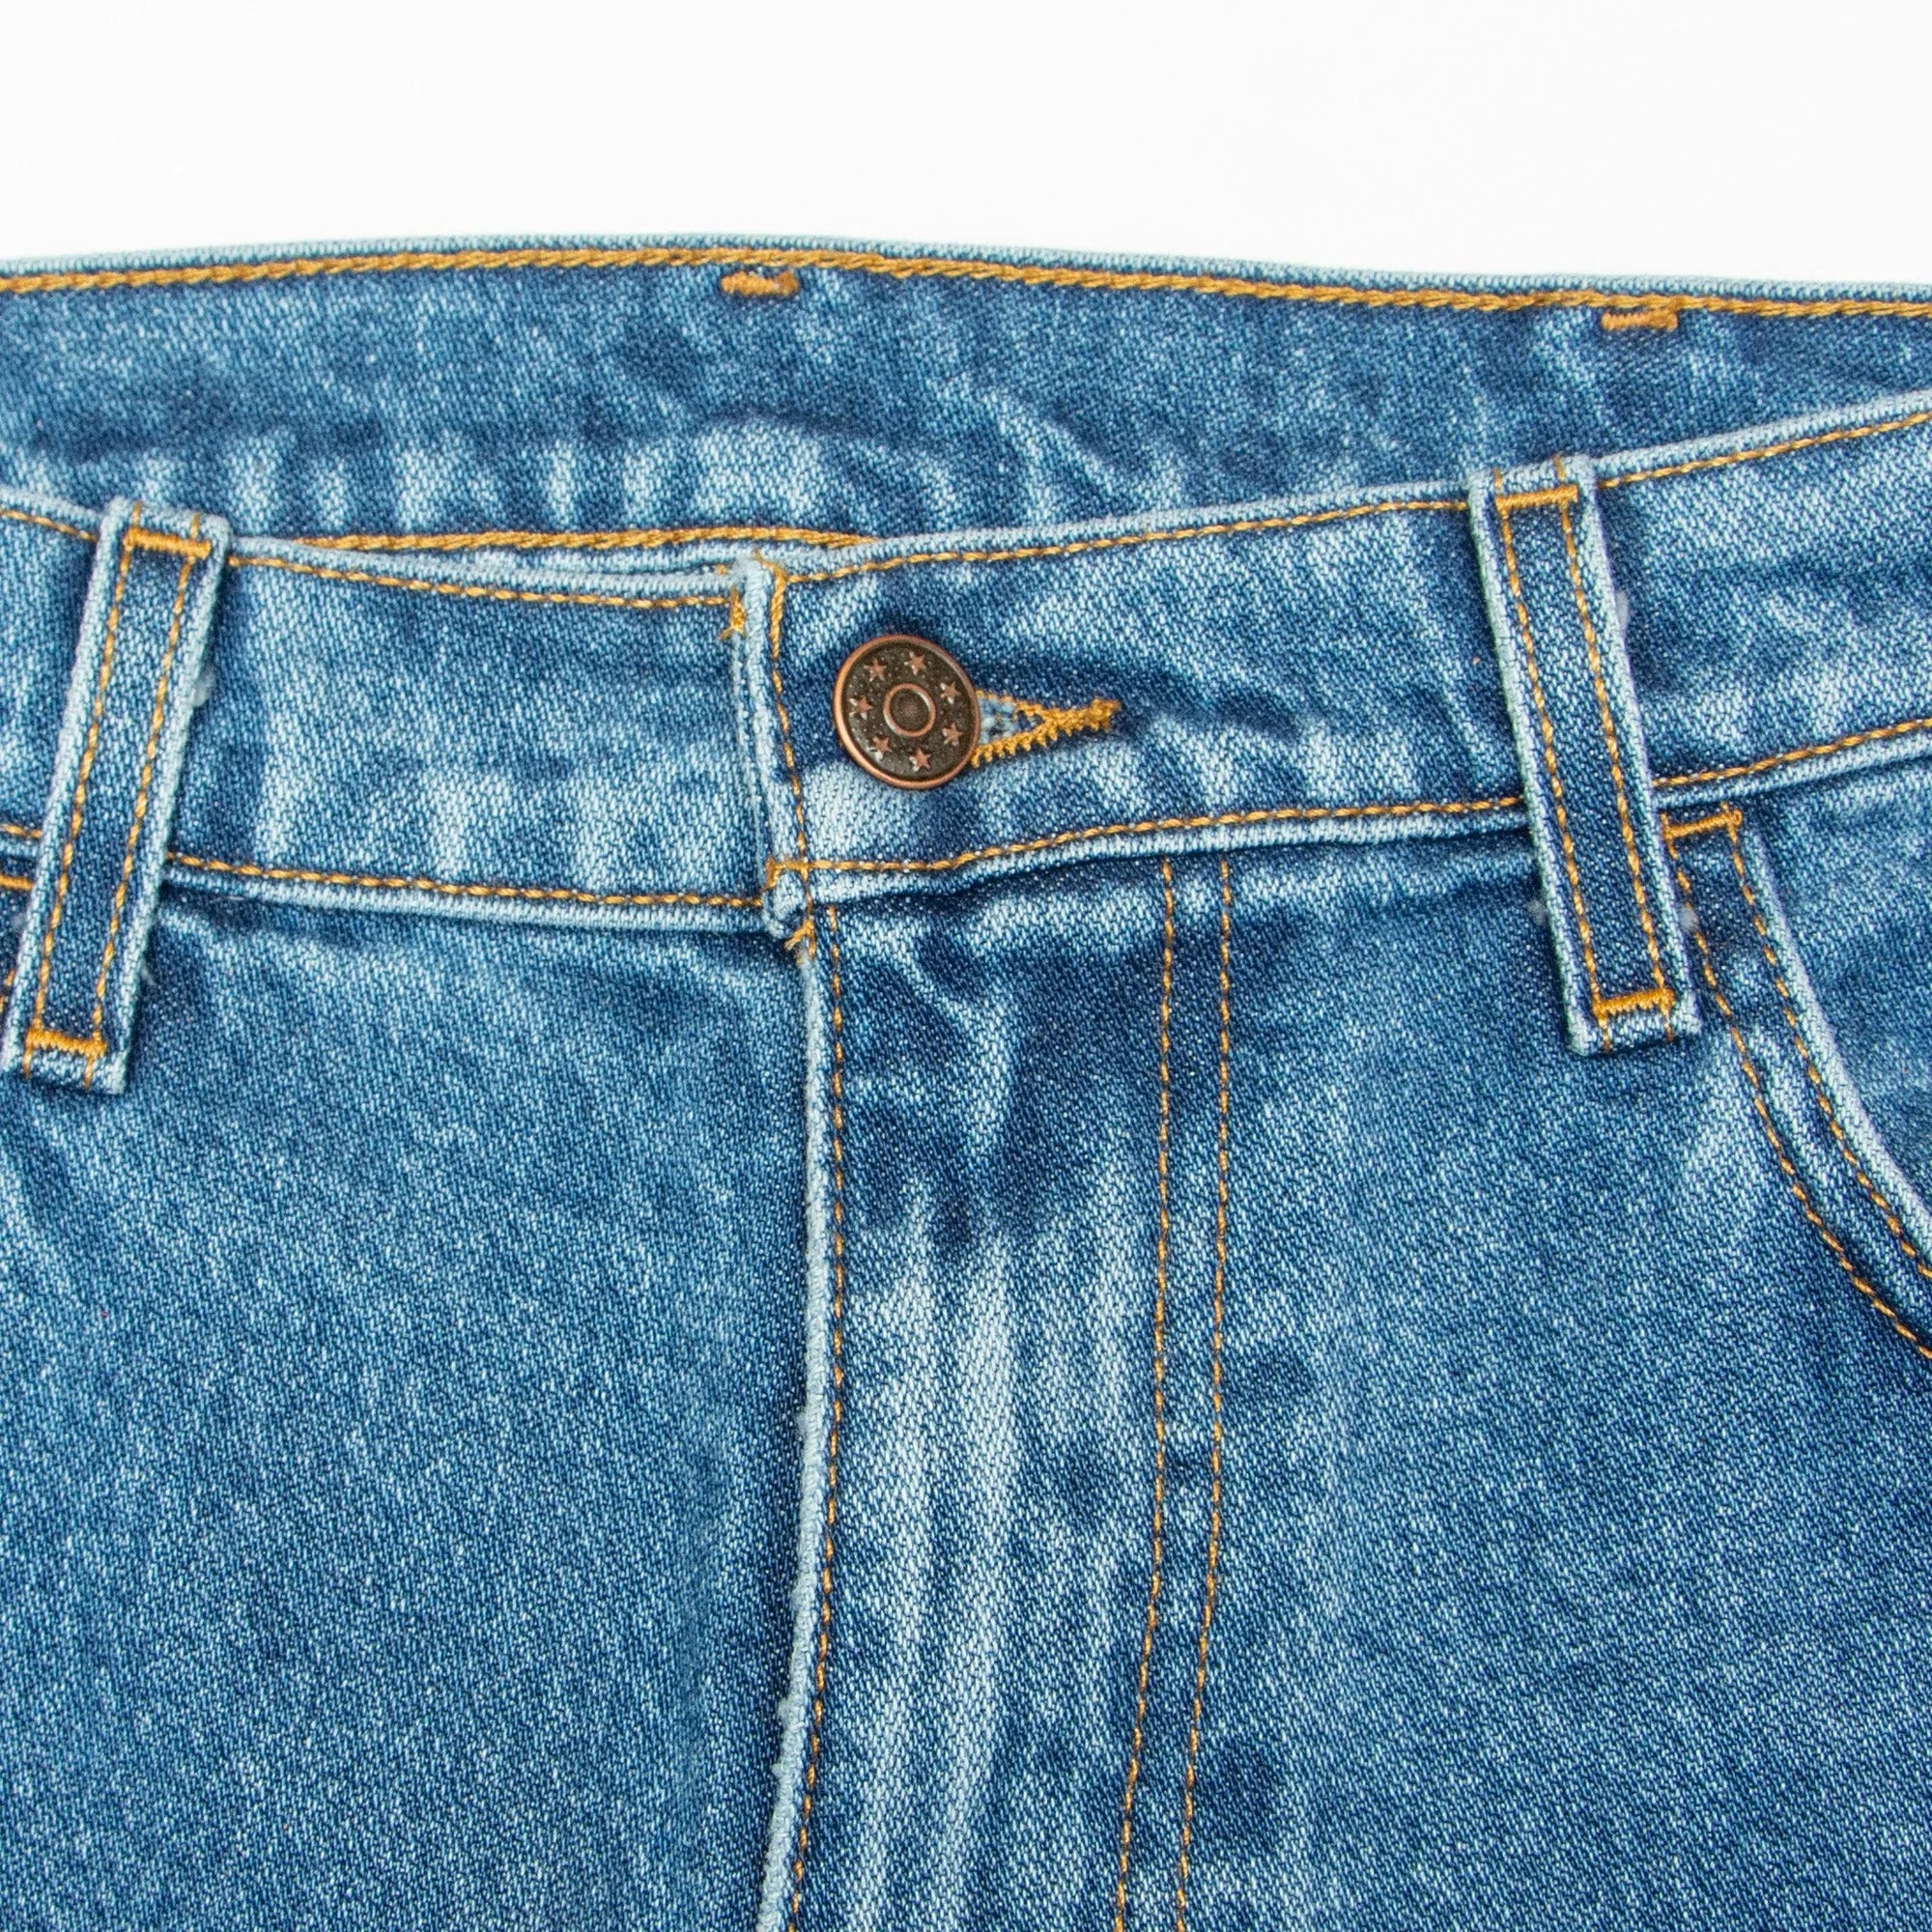 Stonewash American Made Jeans - All American Clothing Co